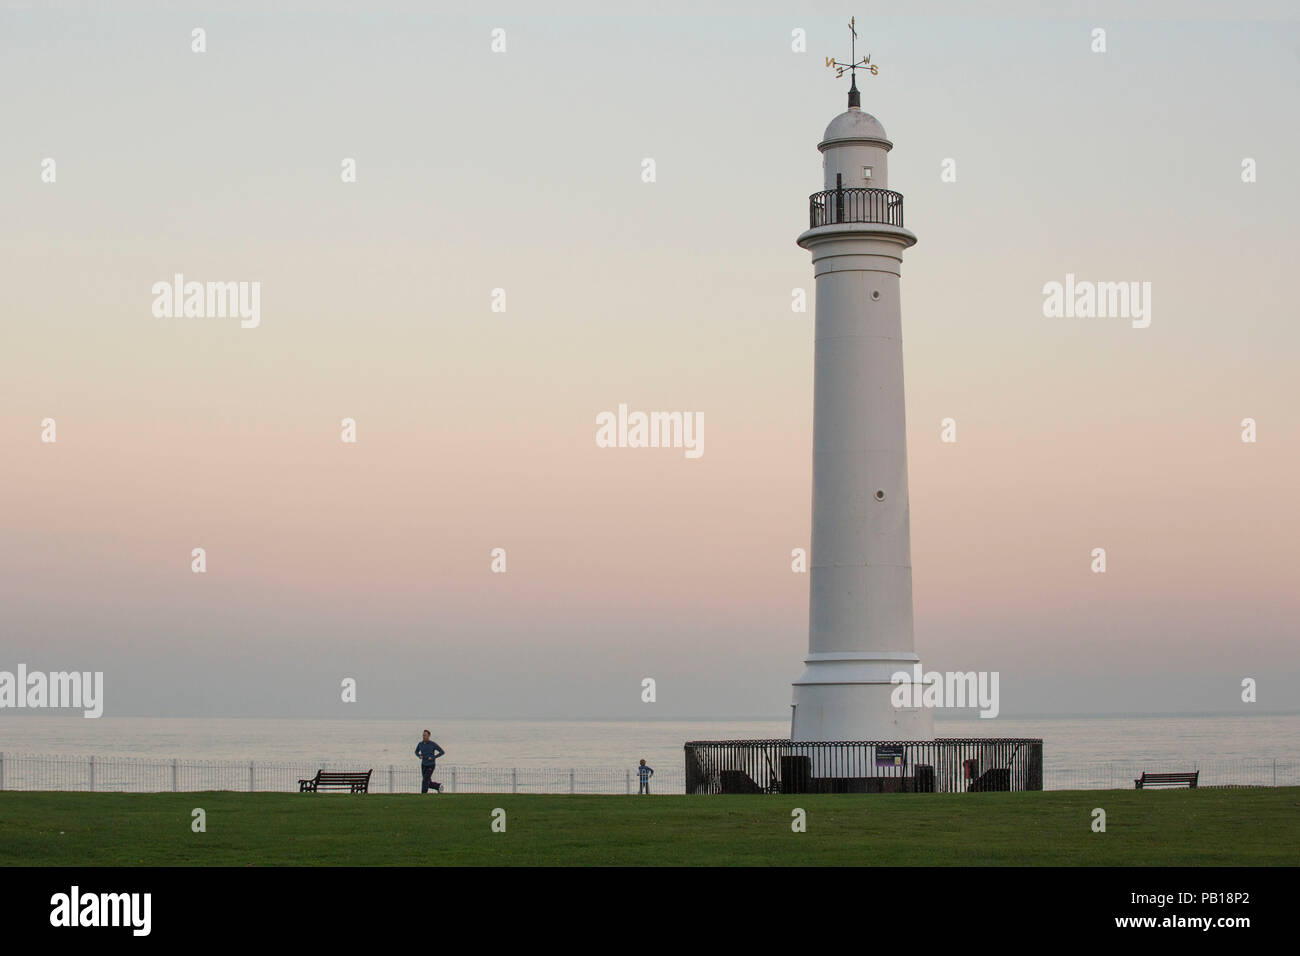 Jogger on Promenade with Lighthouse in Shot, North East Coast. UK Stock Photo